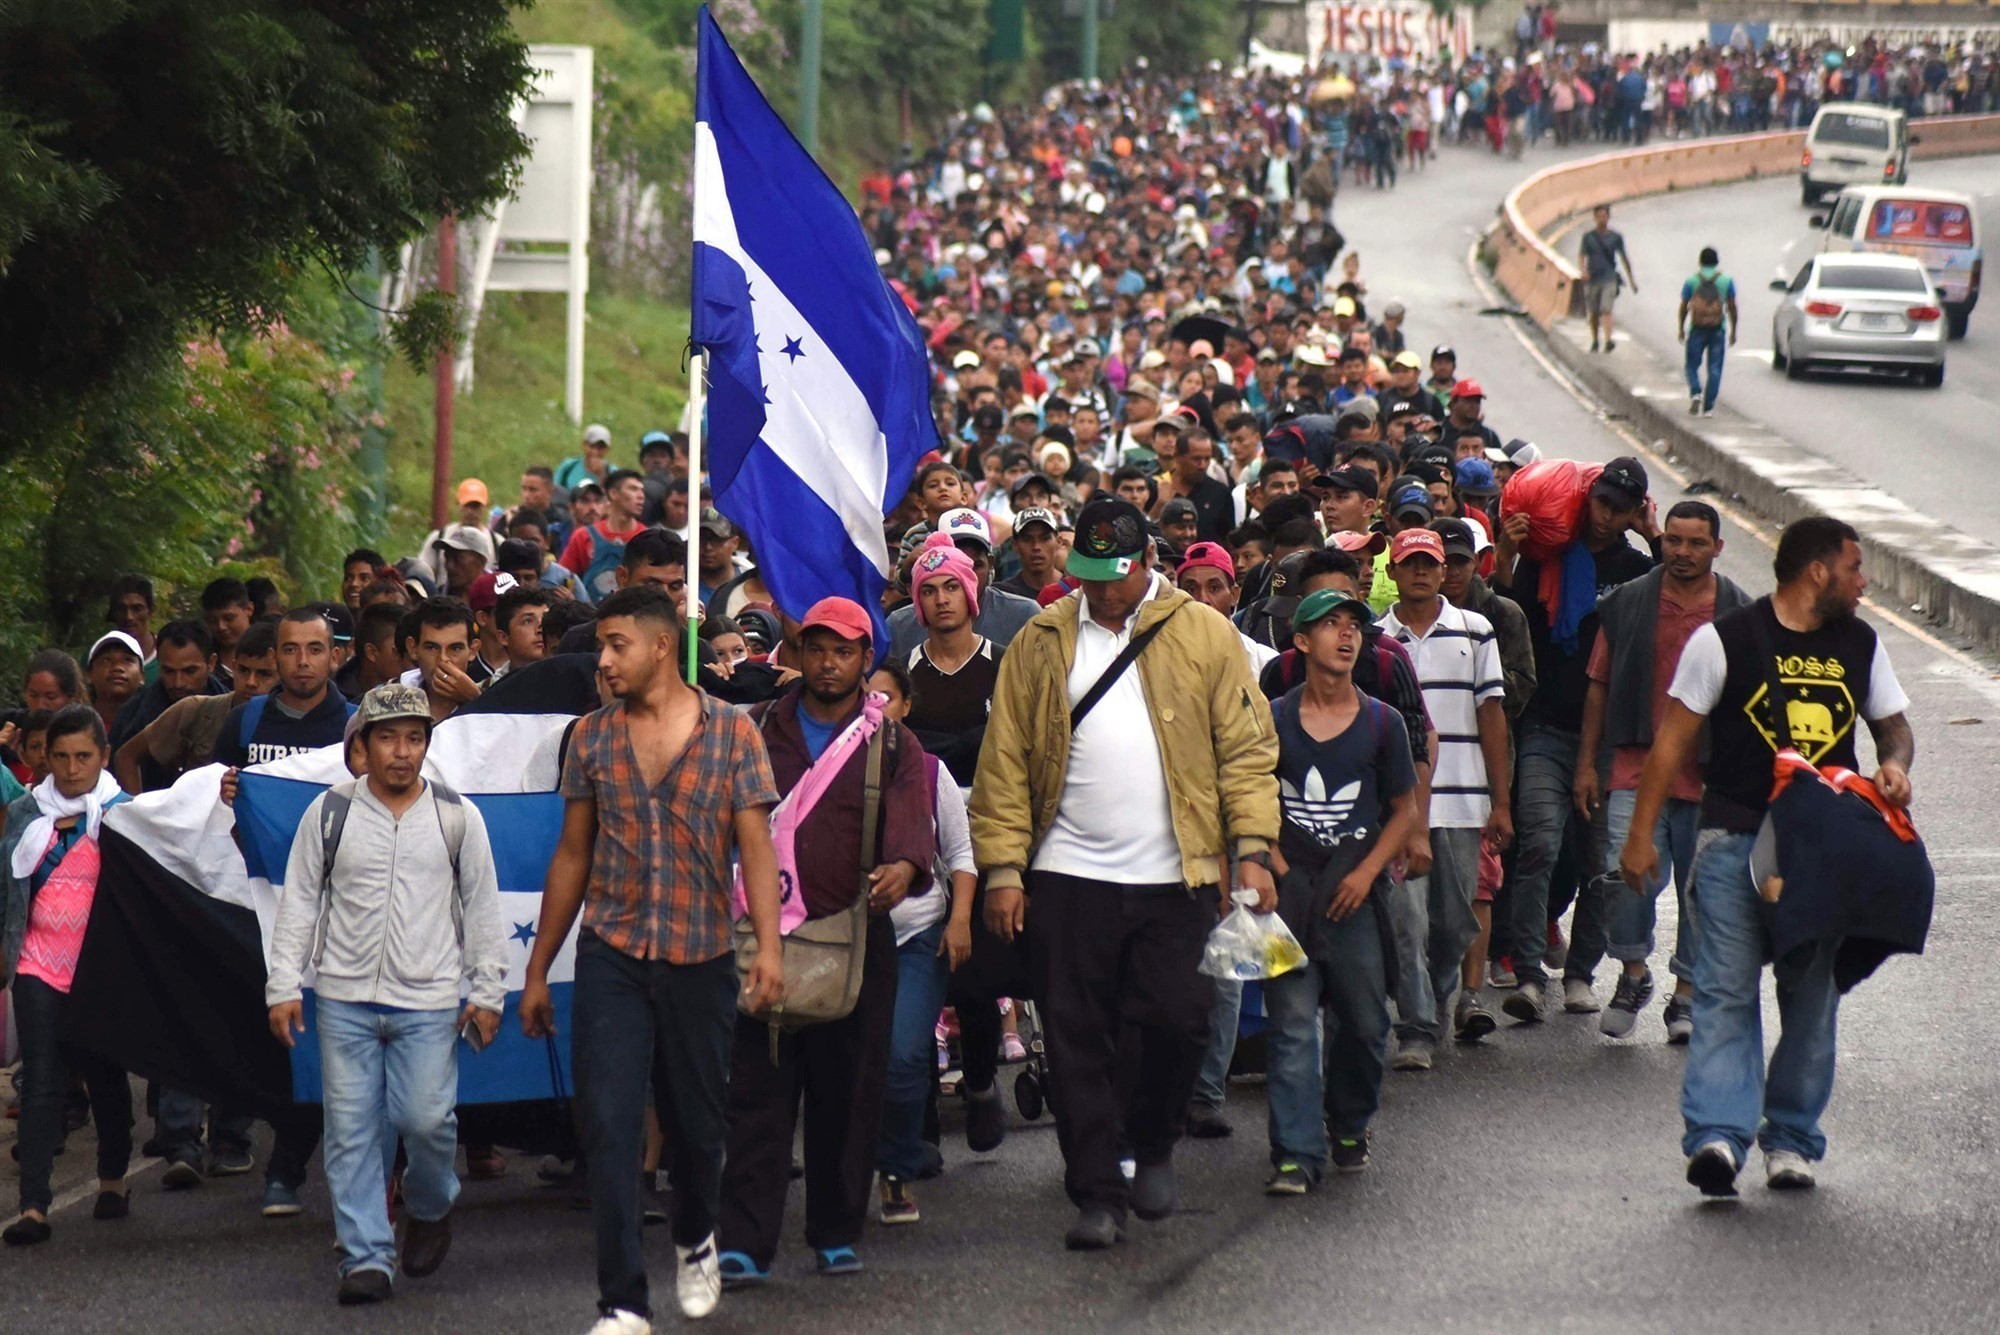 Immigration And Cloward-Piven